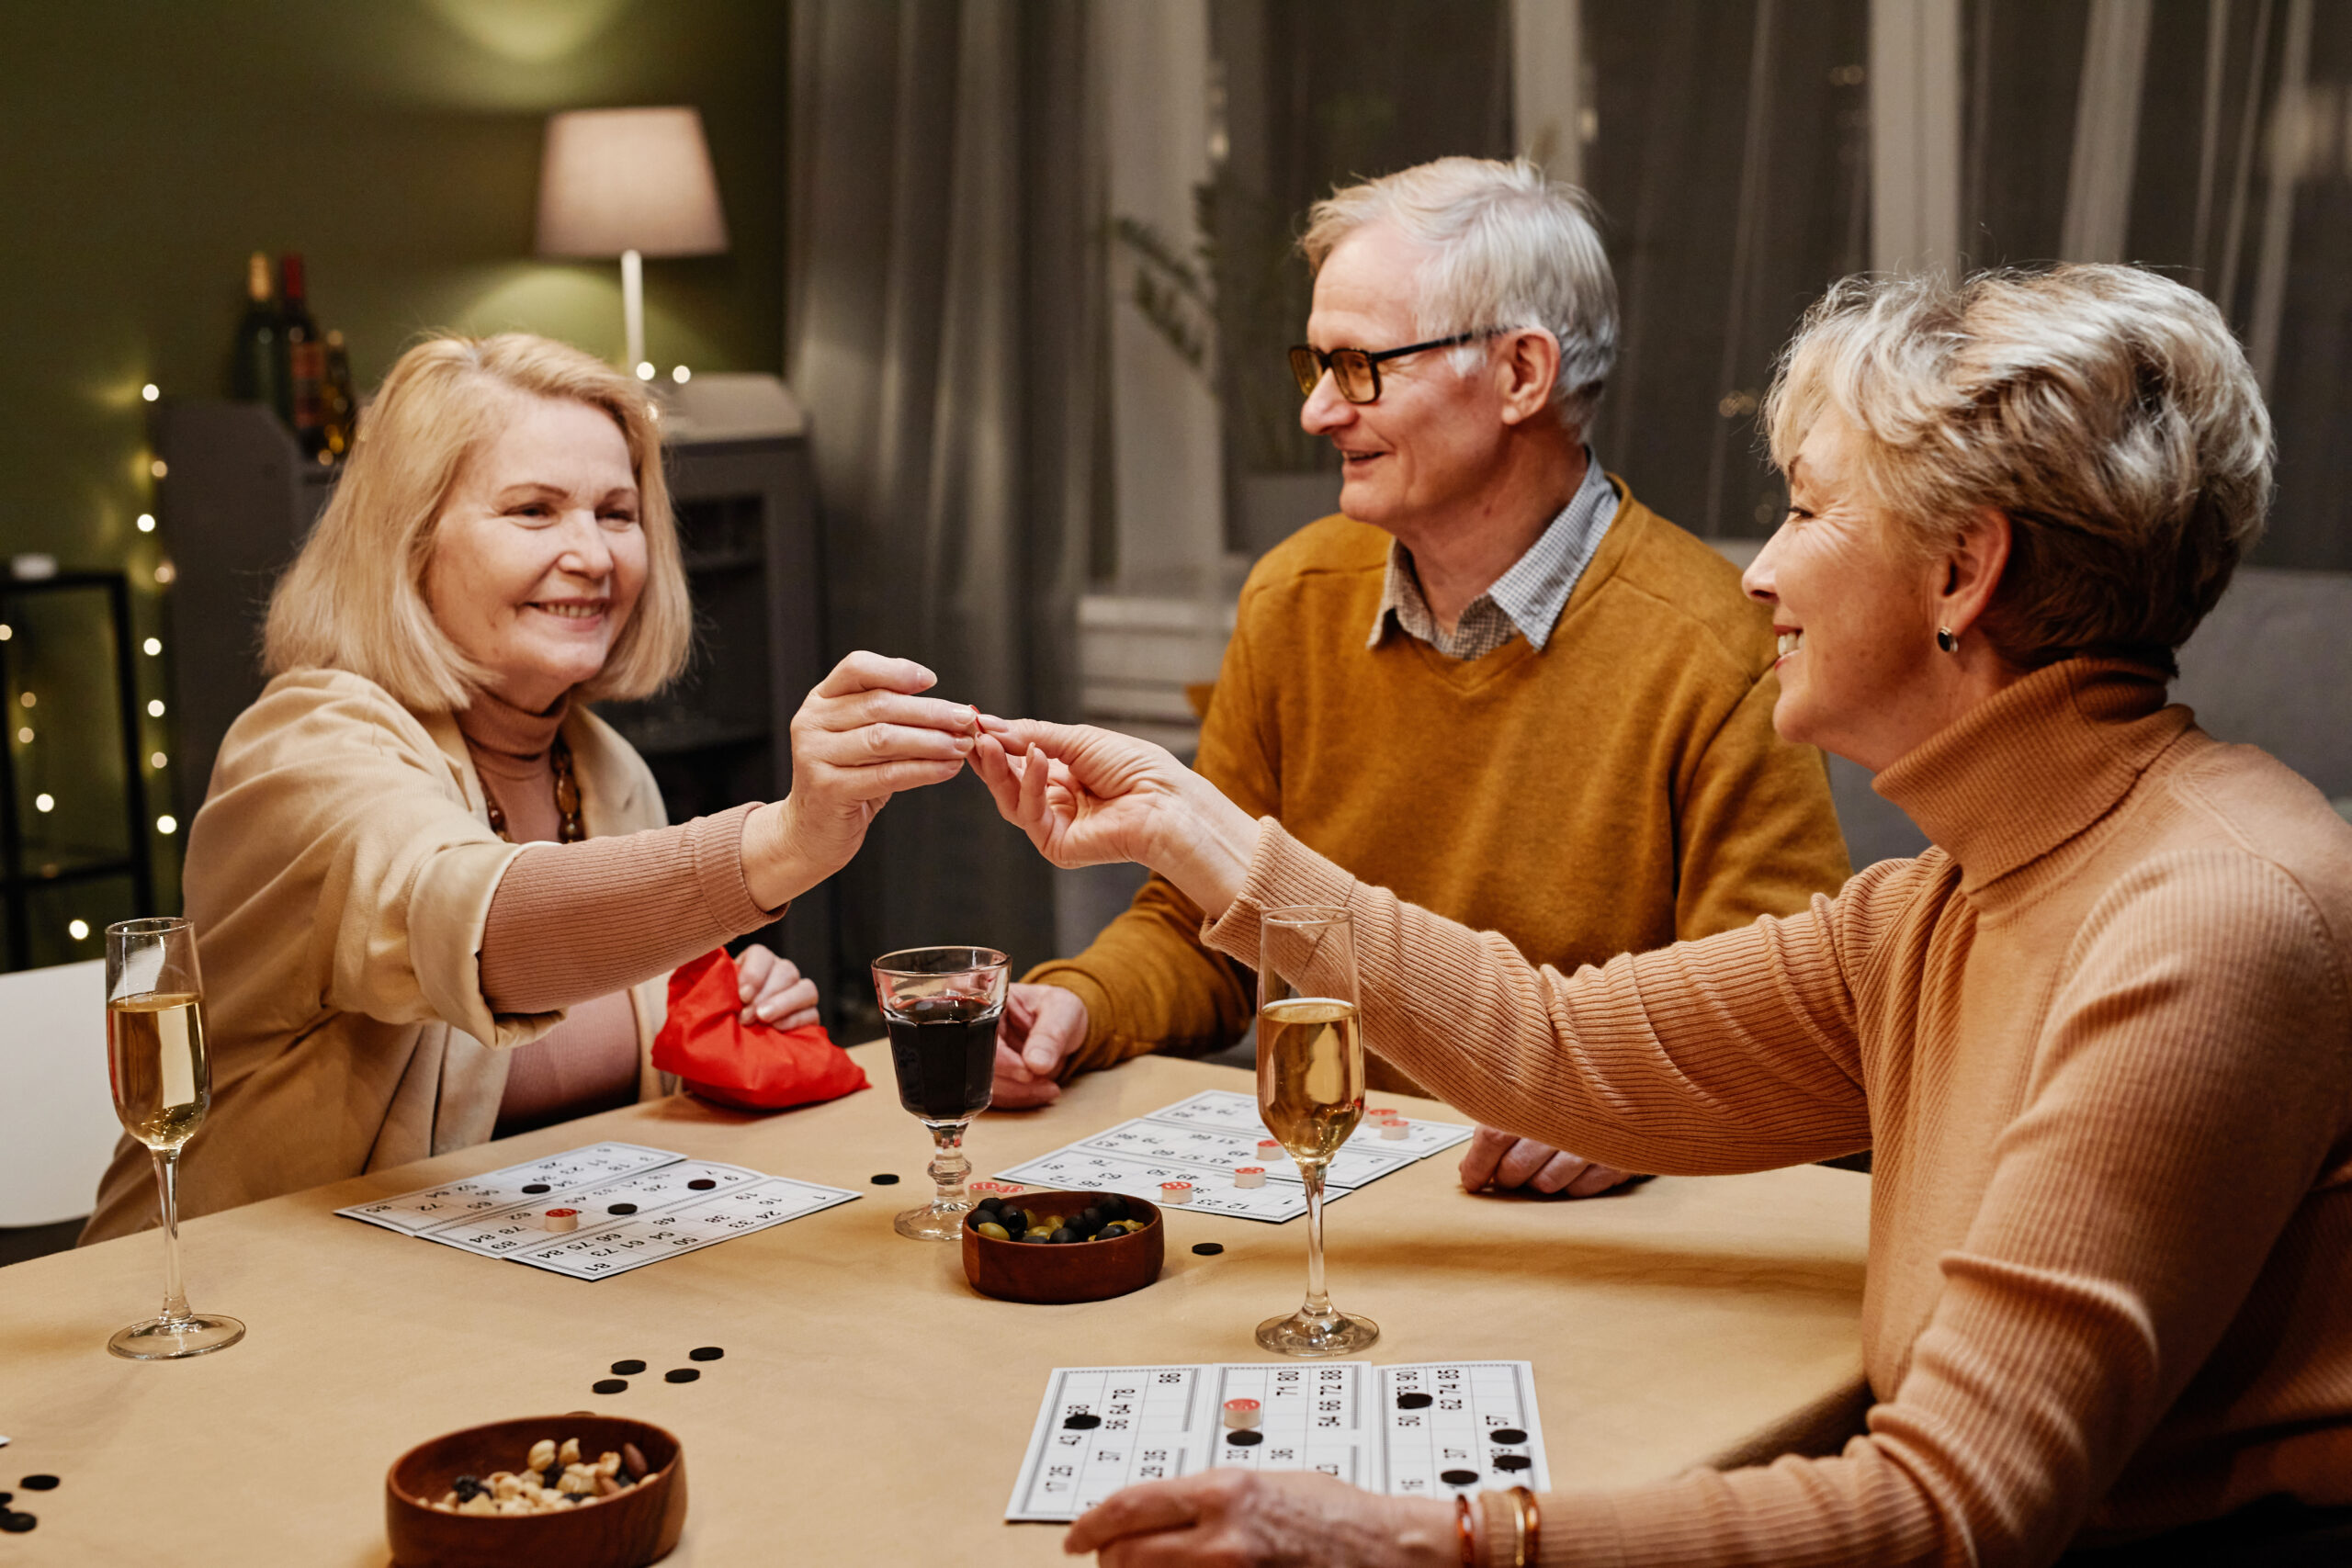 Two aged Caucasian women and man sitting at wooden table with snack and drinks during party and playing board game